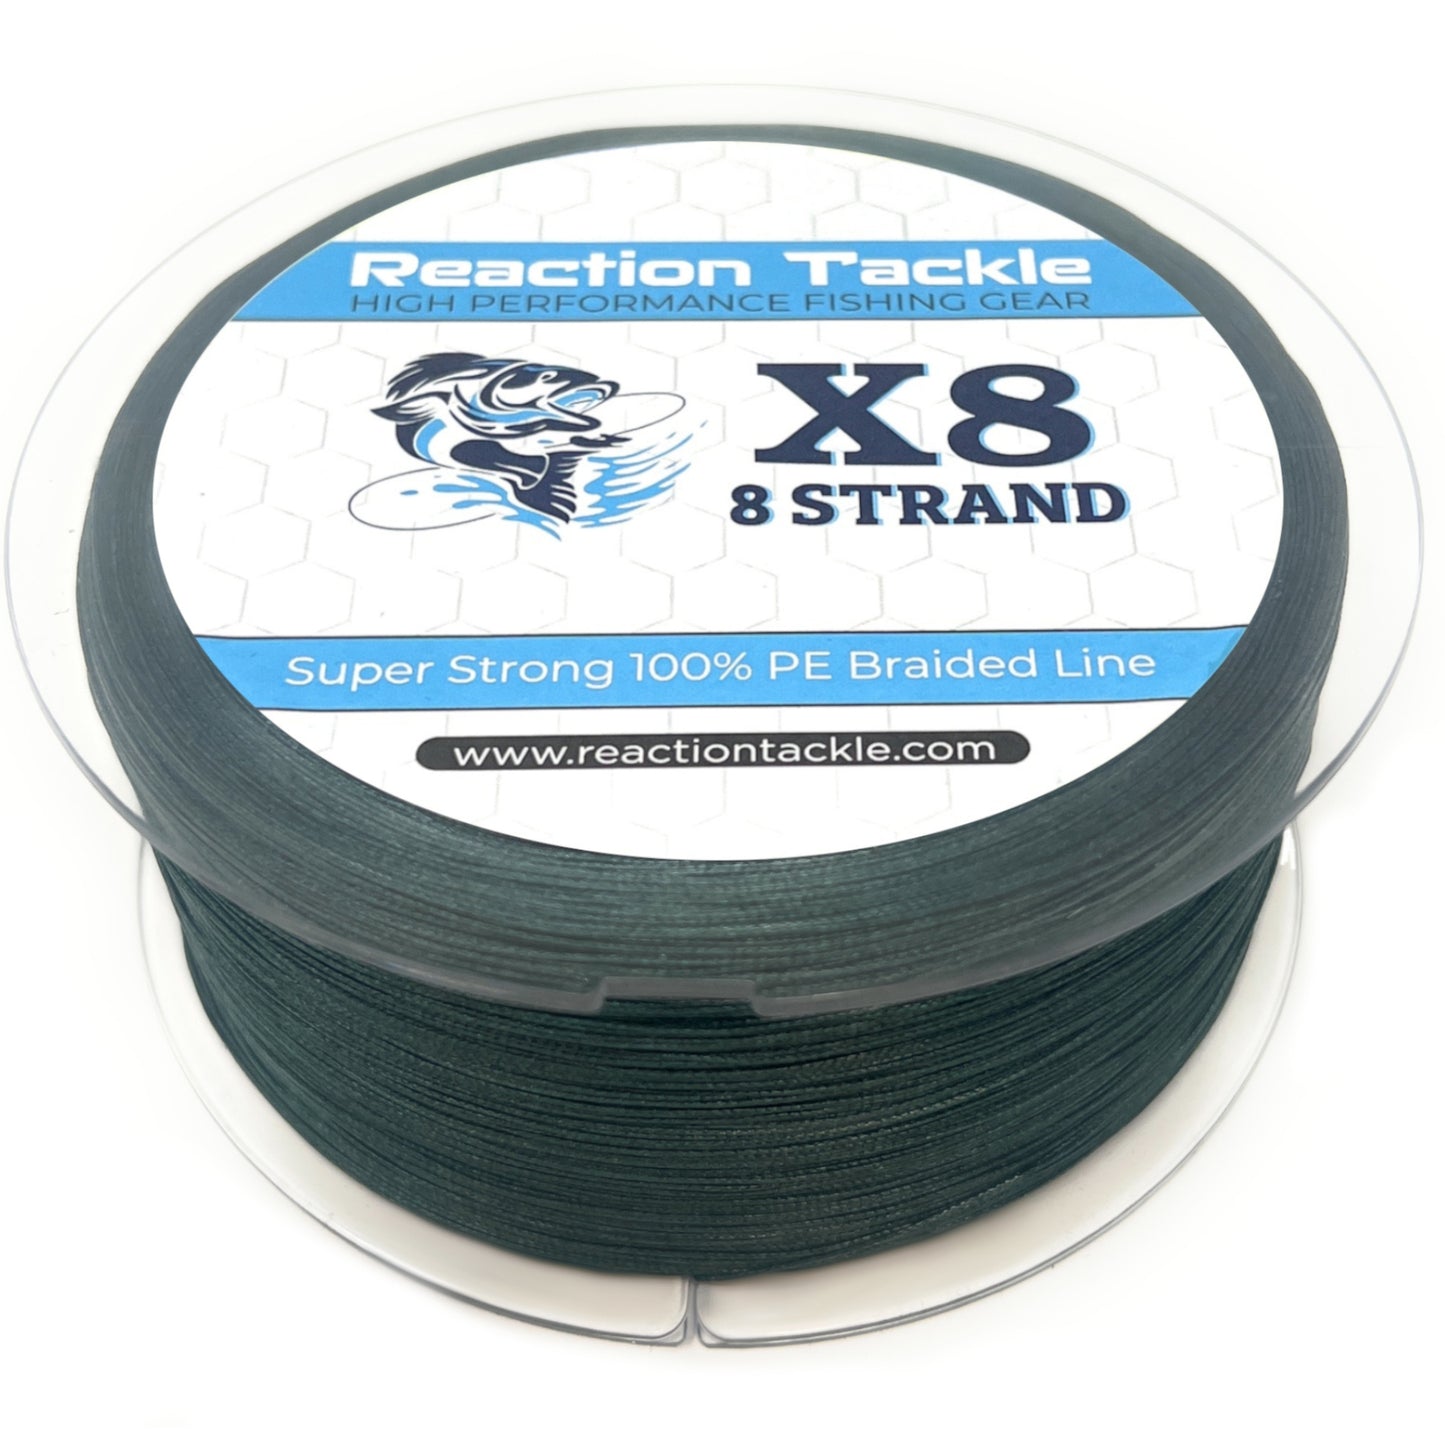 Reaction Tackle Braided Fishing Line - 8 Strand Moss Green 200lb 1000yd